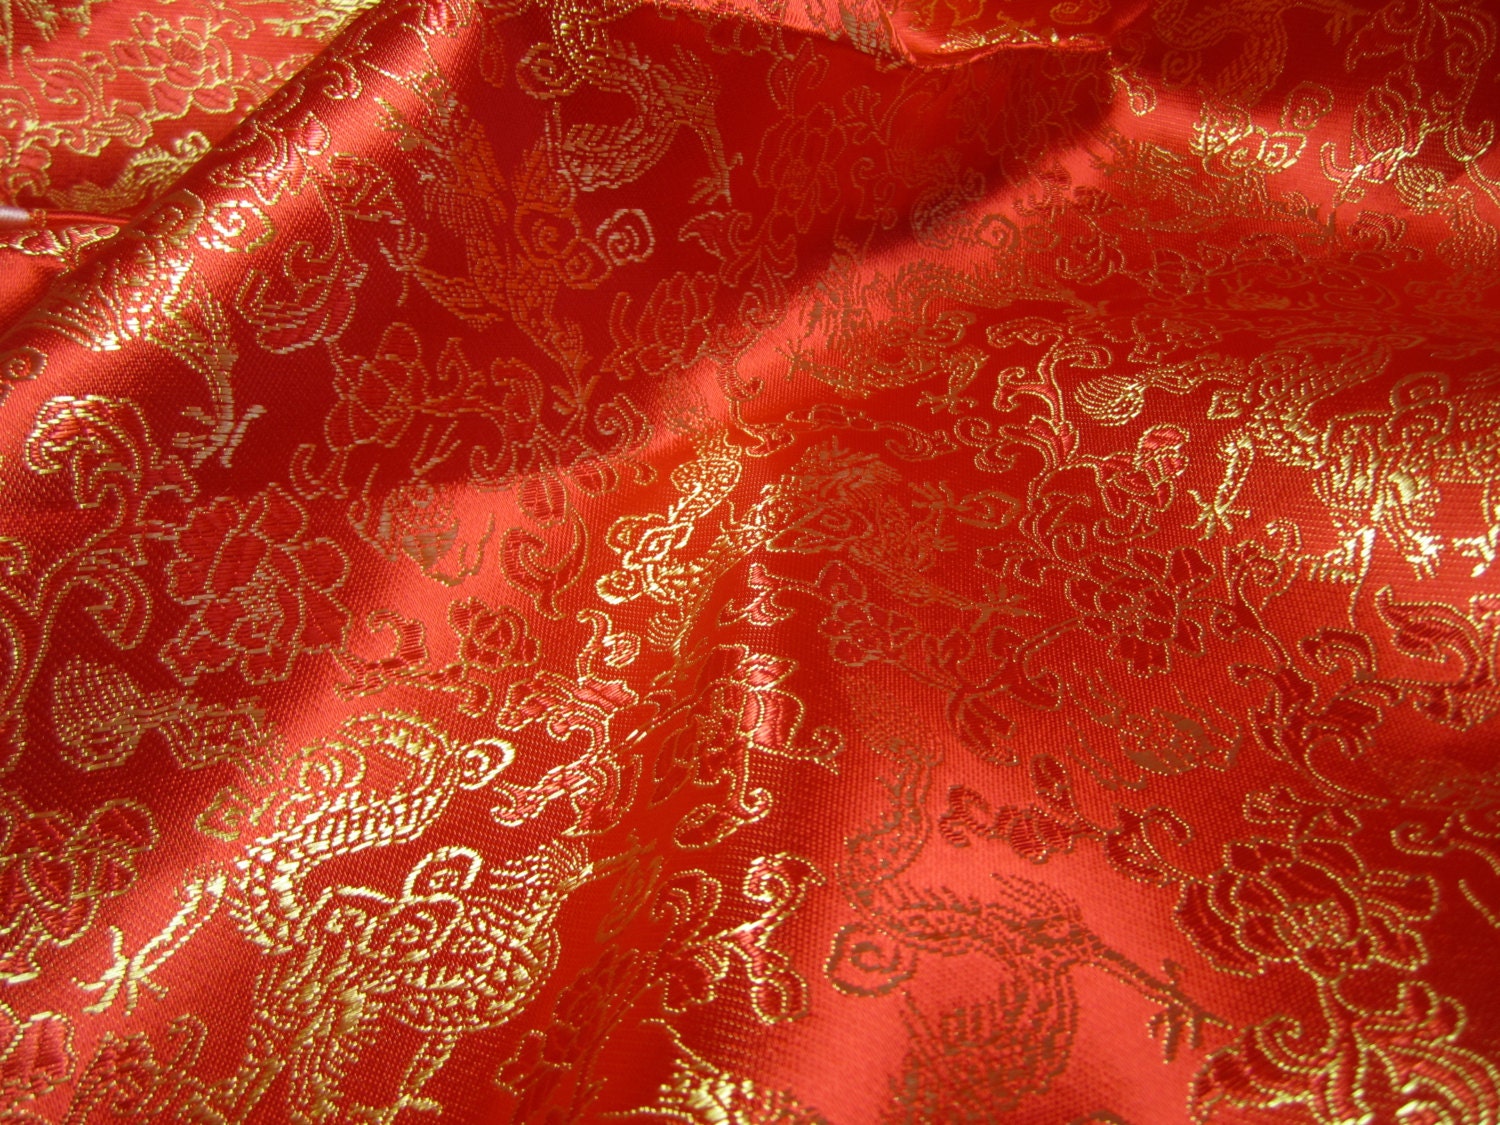 Chinese brocade fabric in bright red with golden by TintinBeads